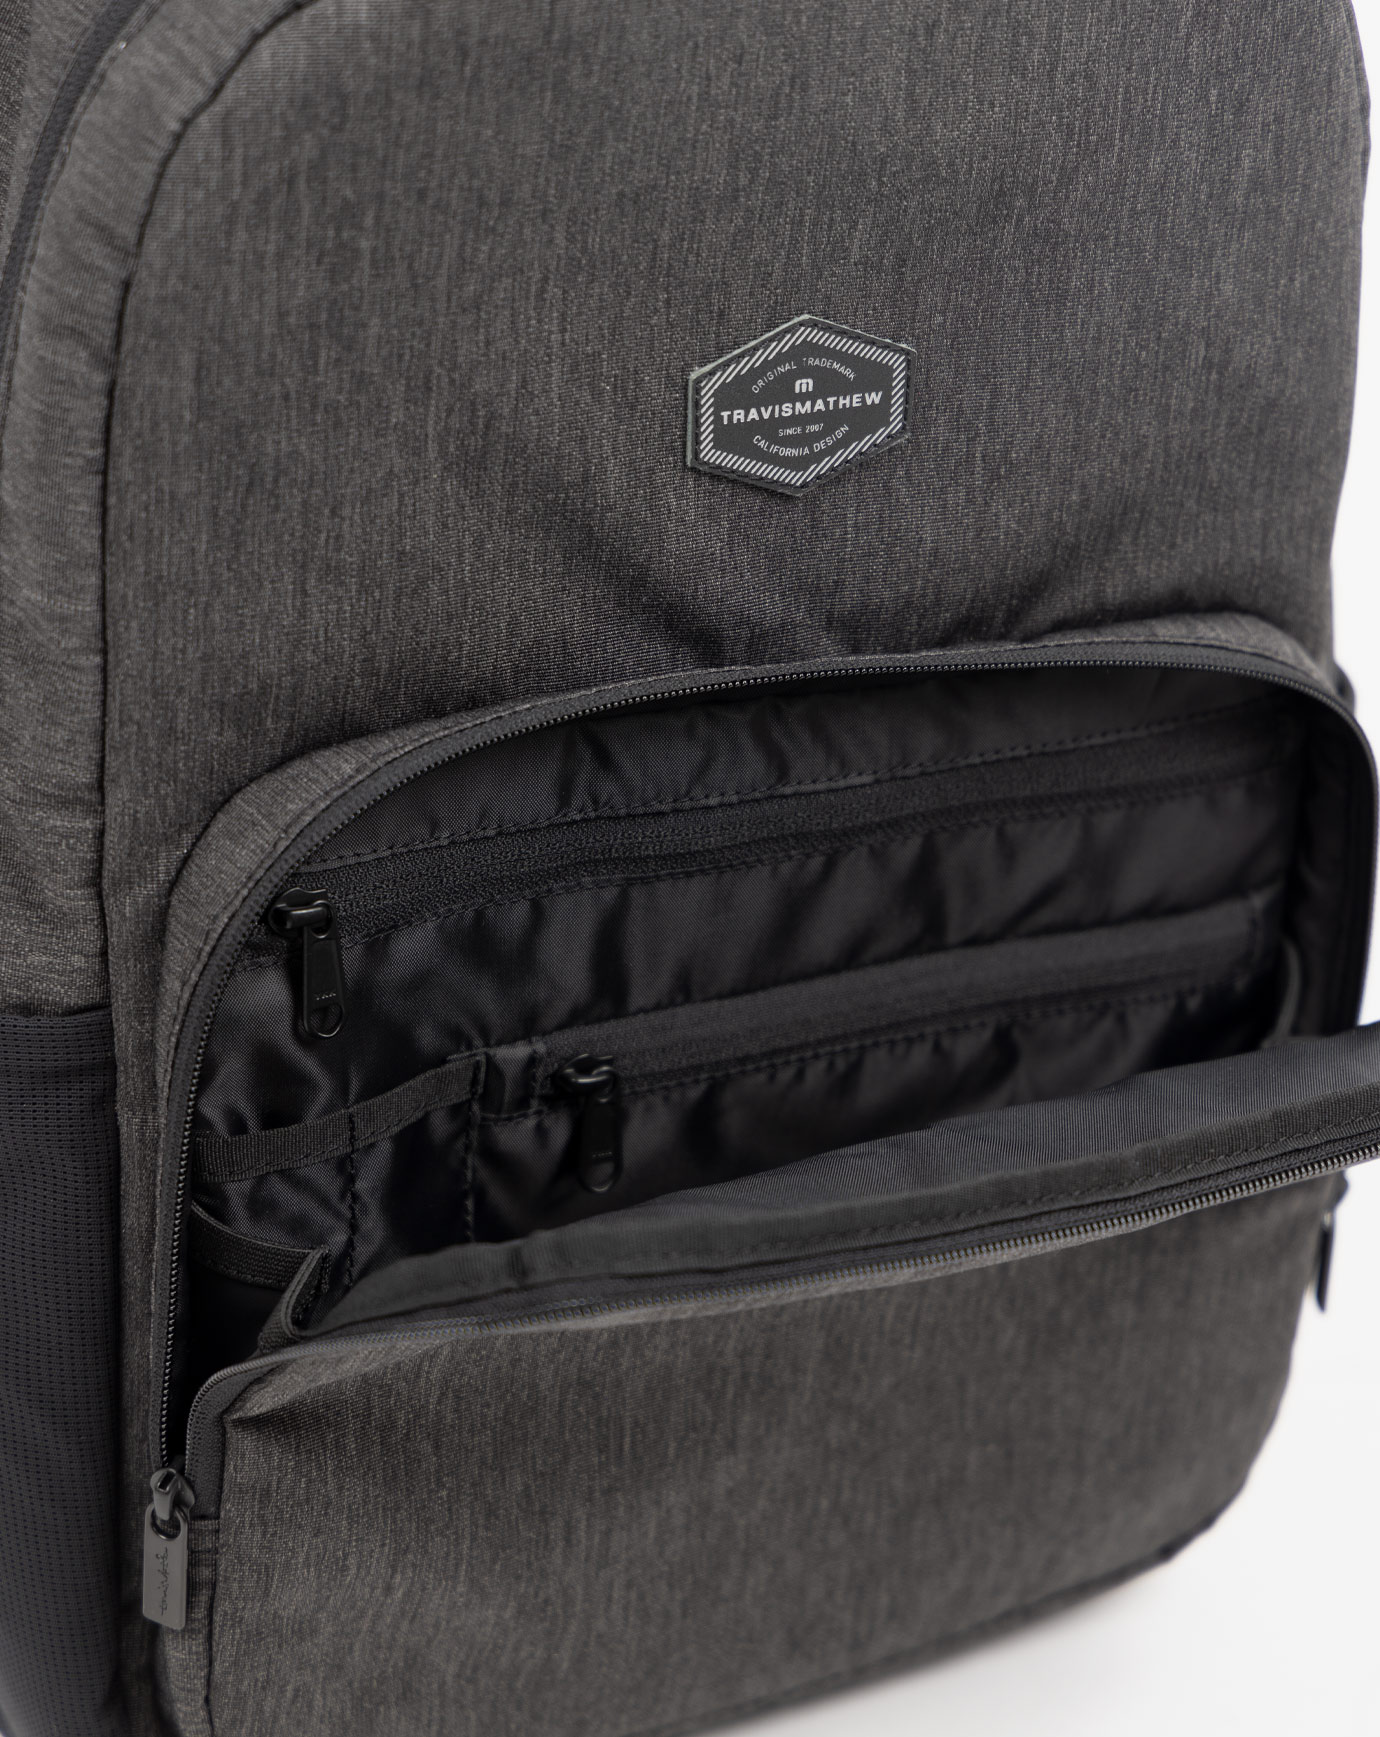 STEADYPACK BACKPACK Image Thumbnail 5